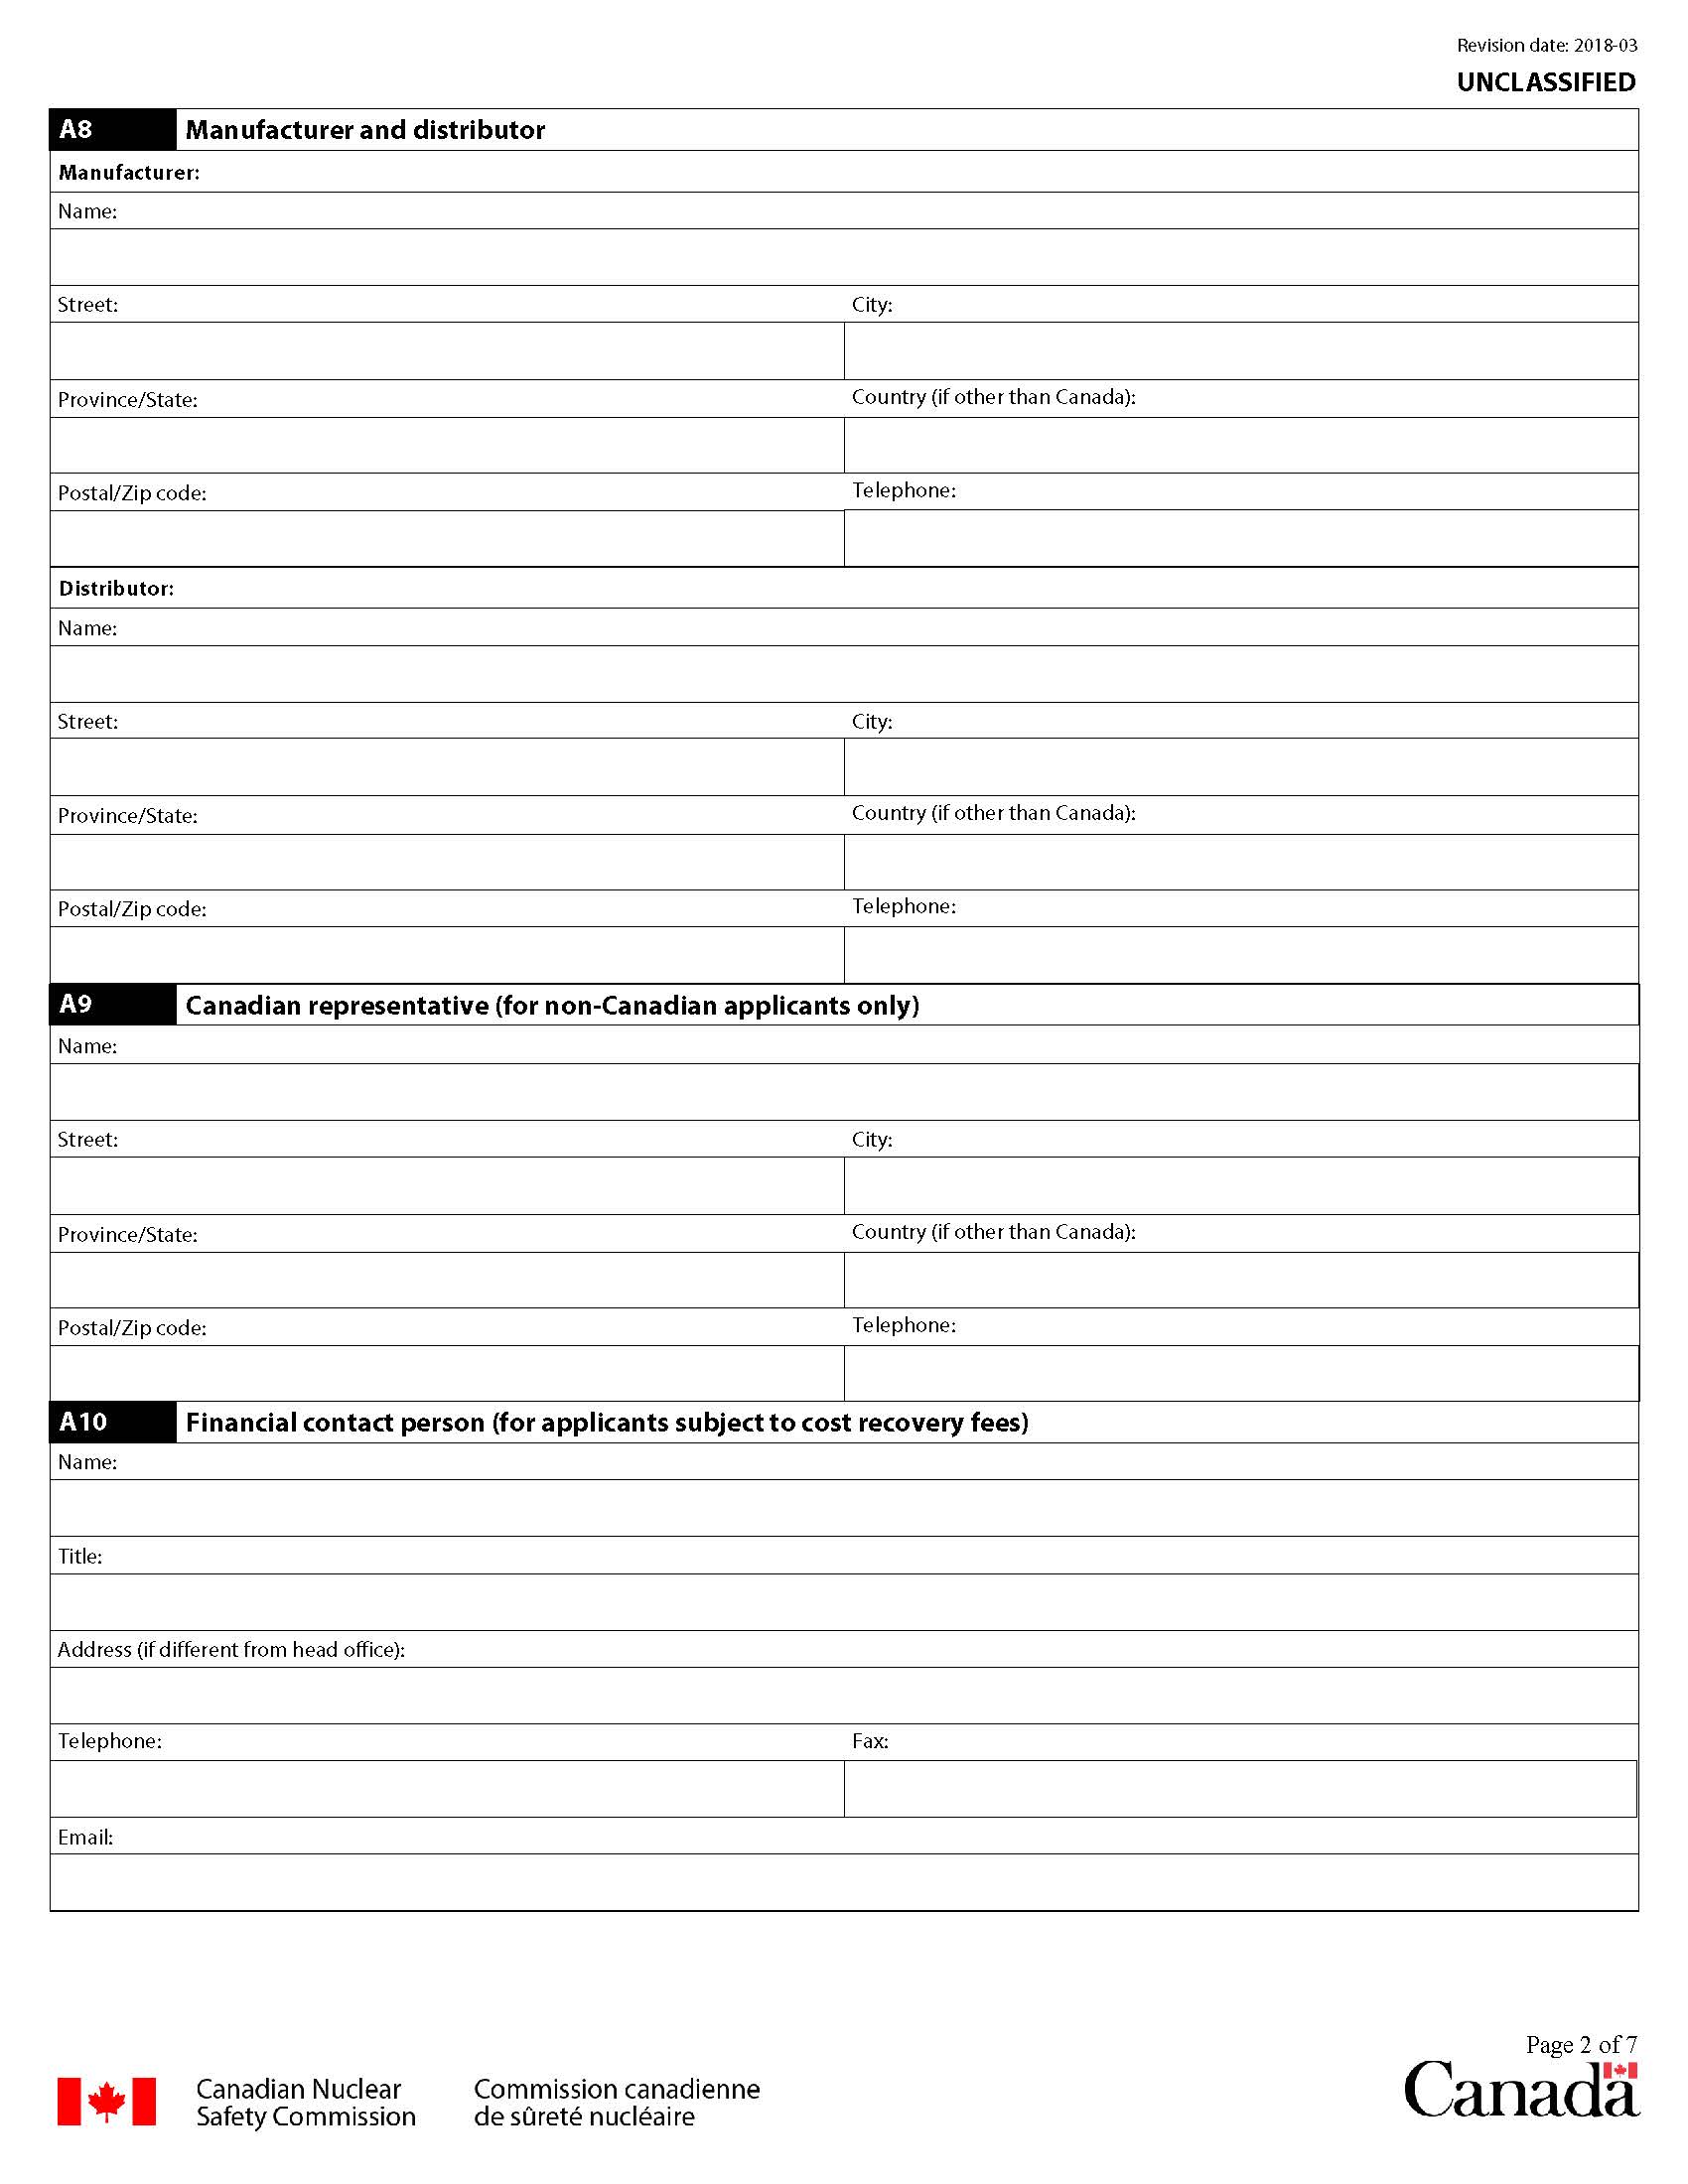 Application form for certification of radiation devices or Class II prescribed equipment: page 2